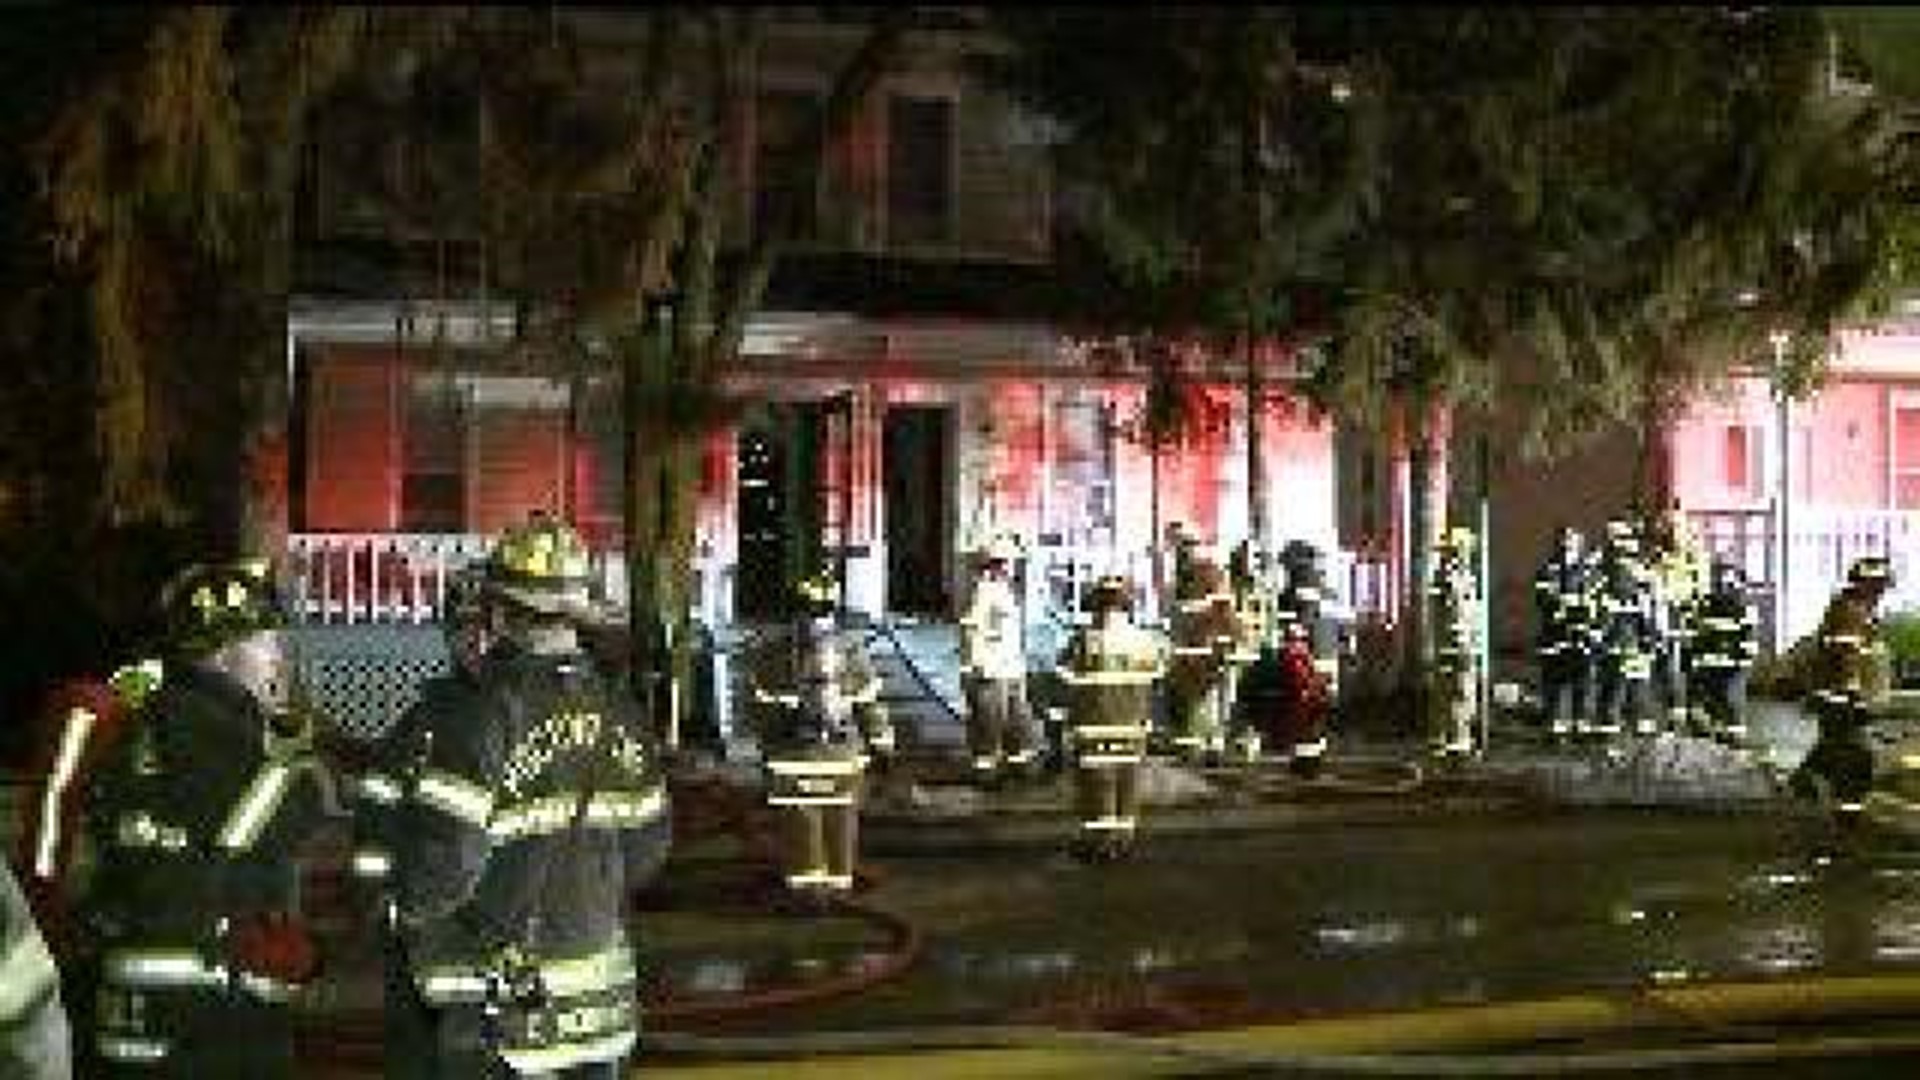 Fire Leaves 12 Out in the Cold